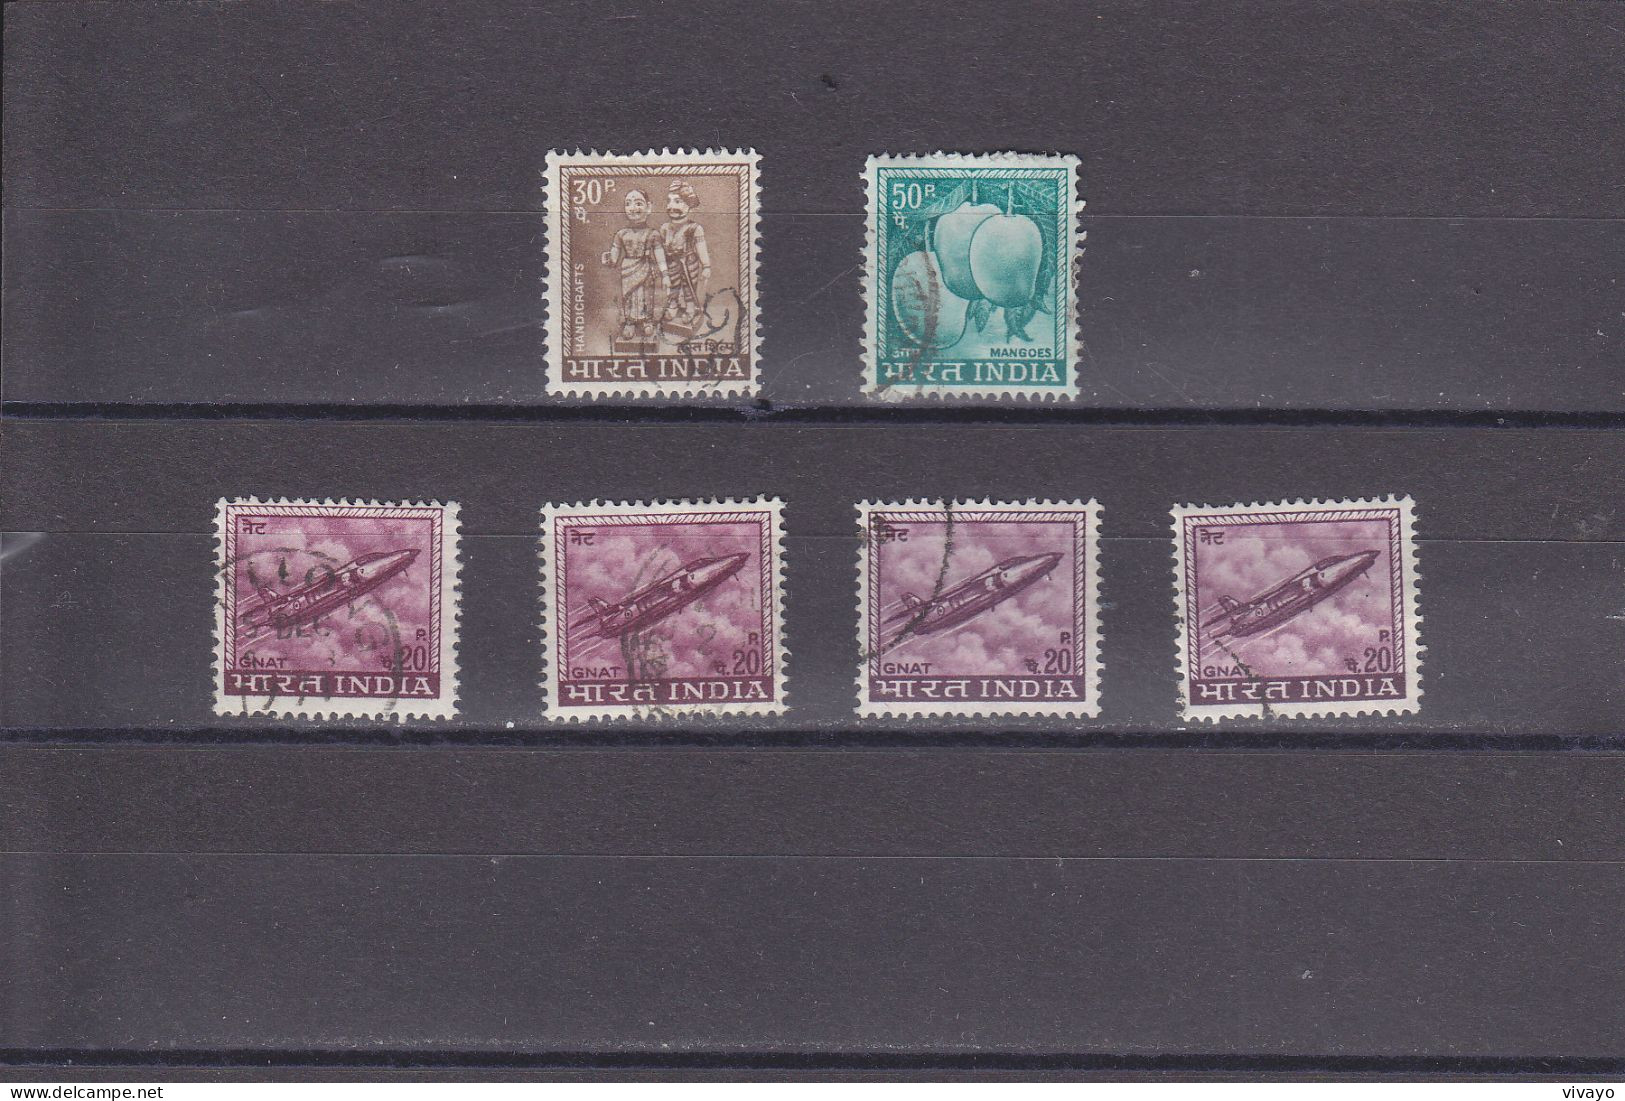 INDIA - INDE - O / FINE CANCELLED - 1967 - DEFINTIVES - MANGO, PUPPETS, GNAT FIGHTER - Mi. 394, 395, 436 - Used Stamps